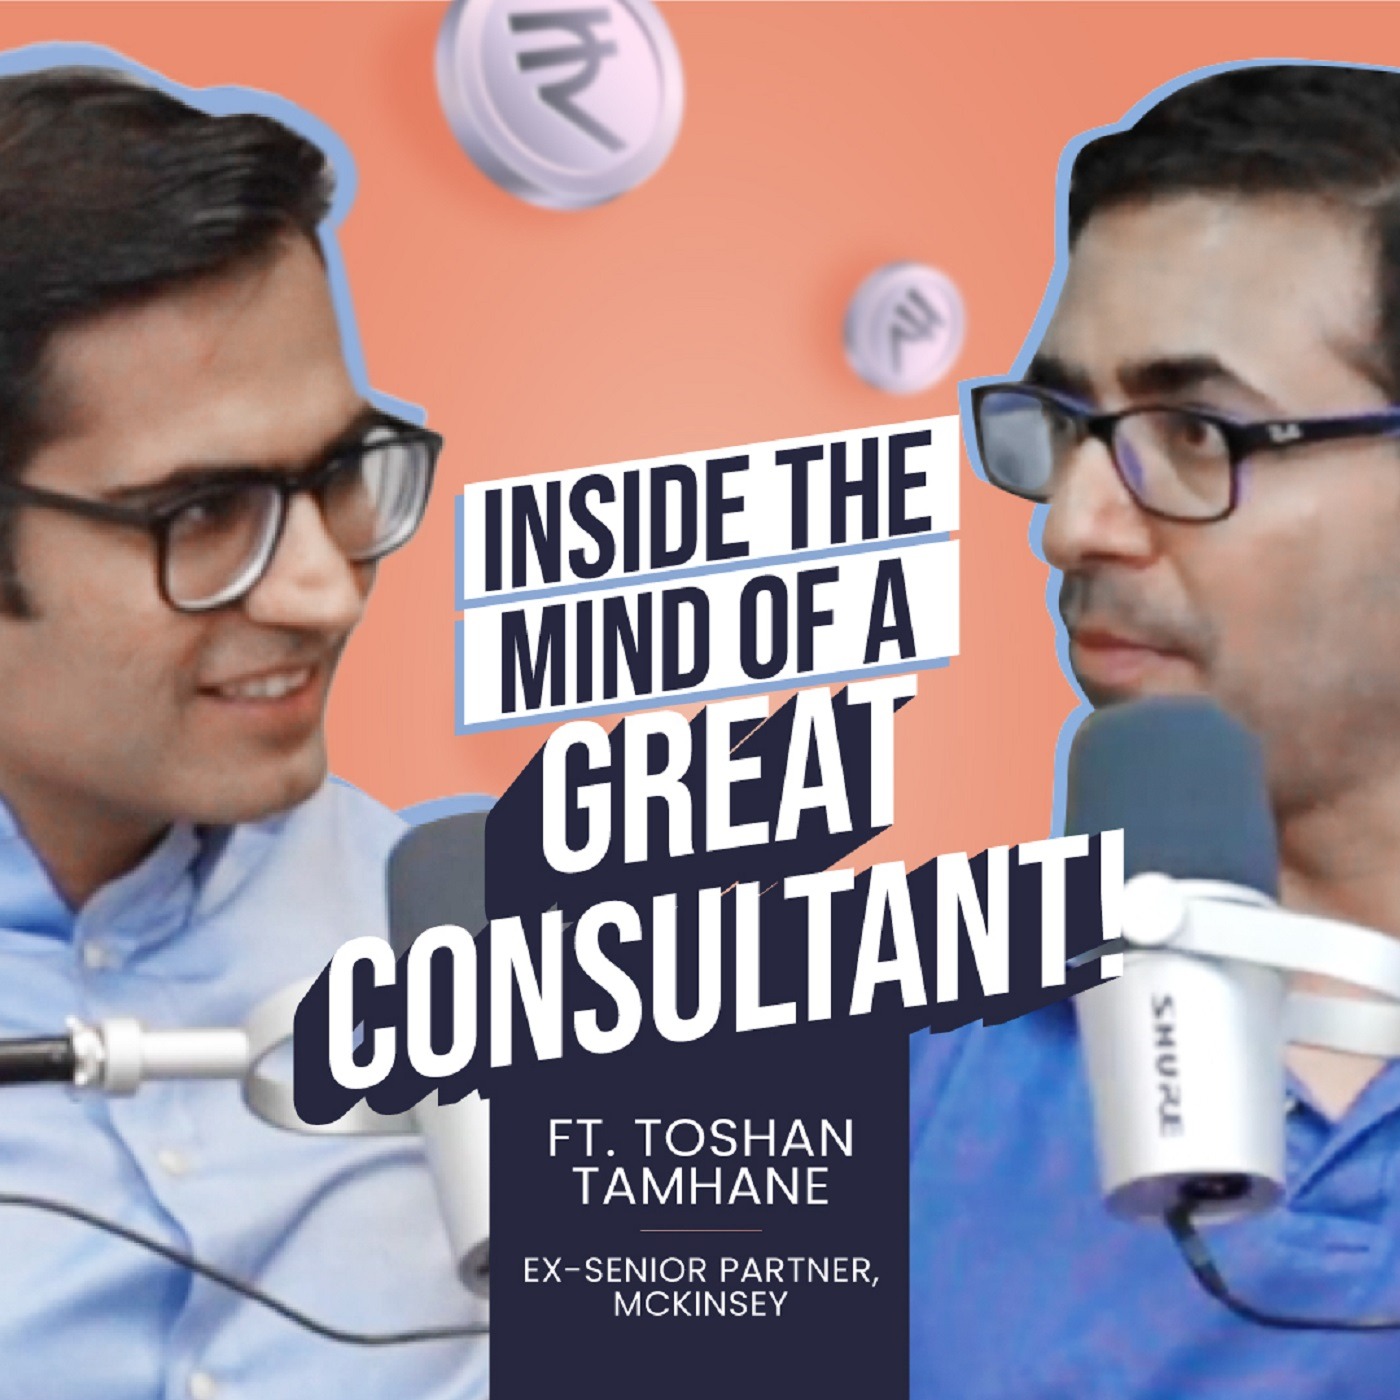 Toshan Tamhane, Ex-senior partner at McKinsey reveals the strategy to maximize your income as a CONSULTANT